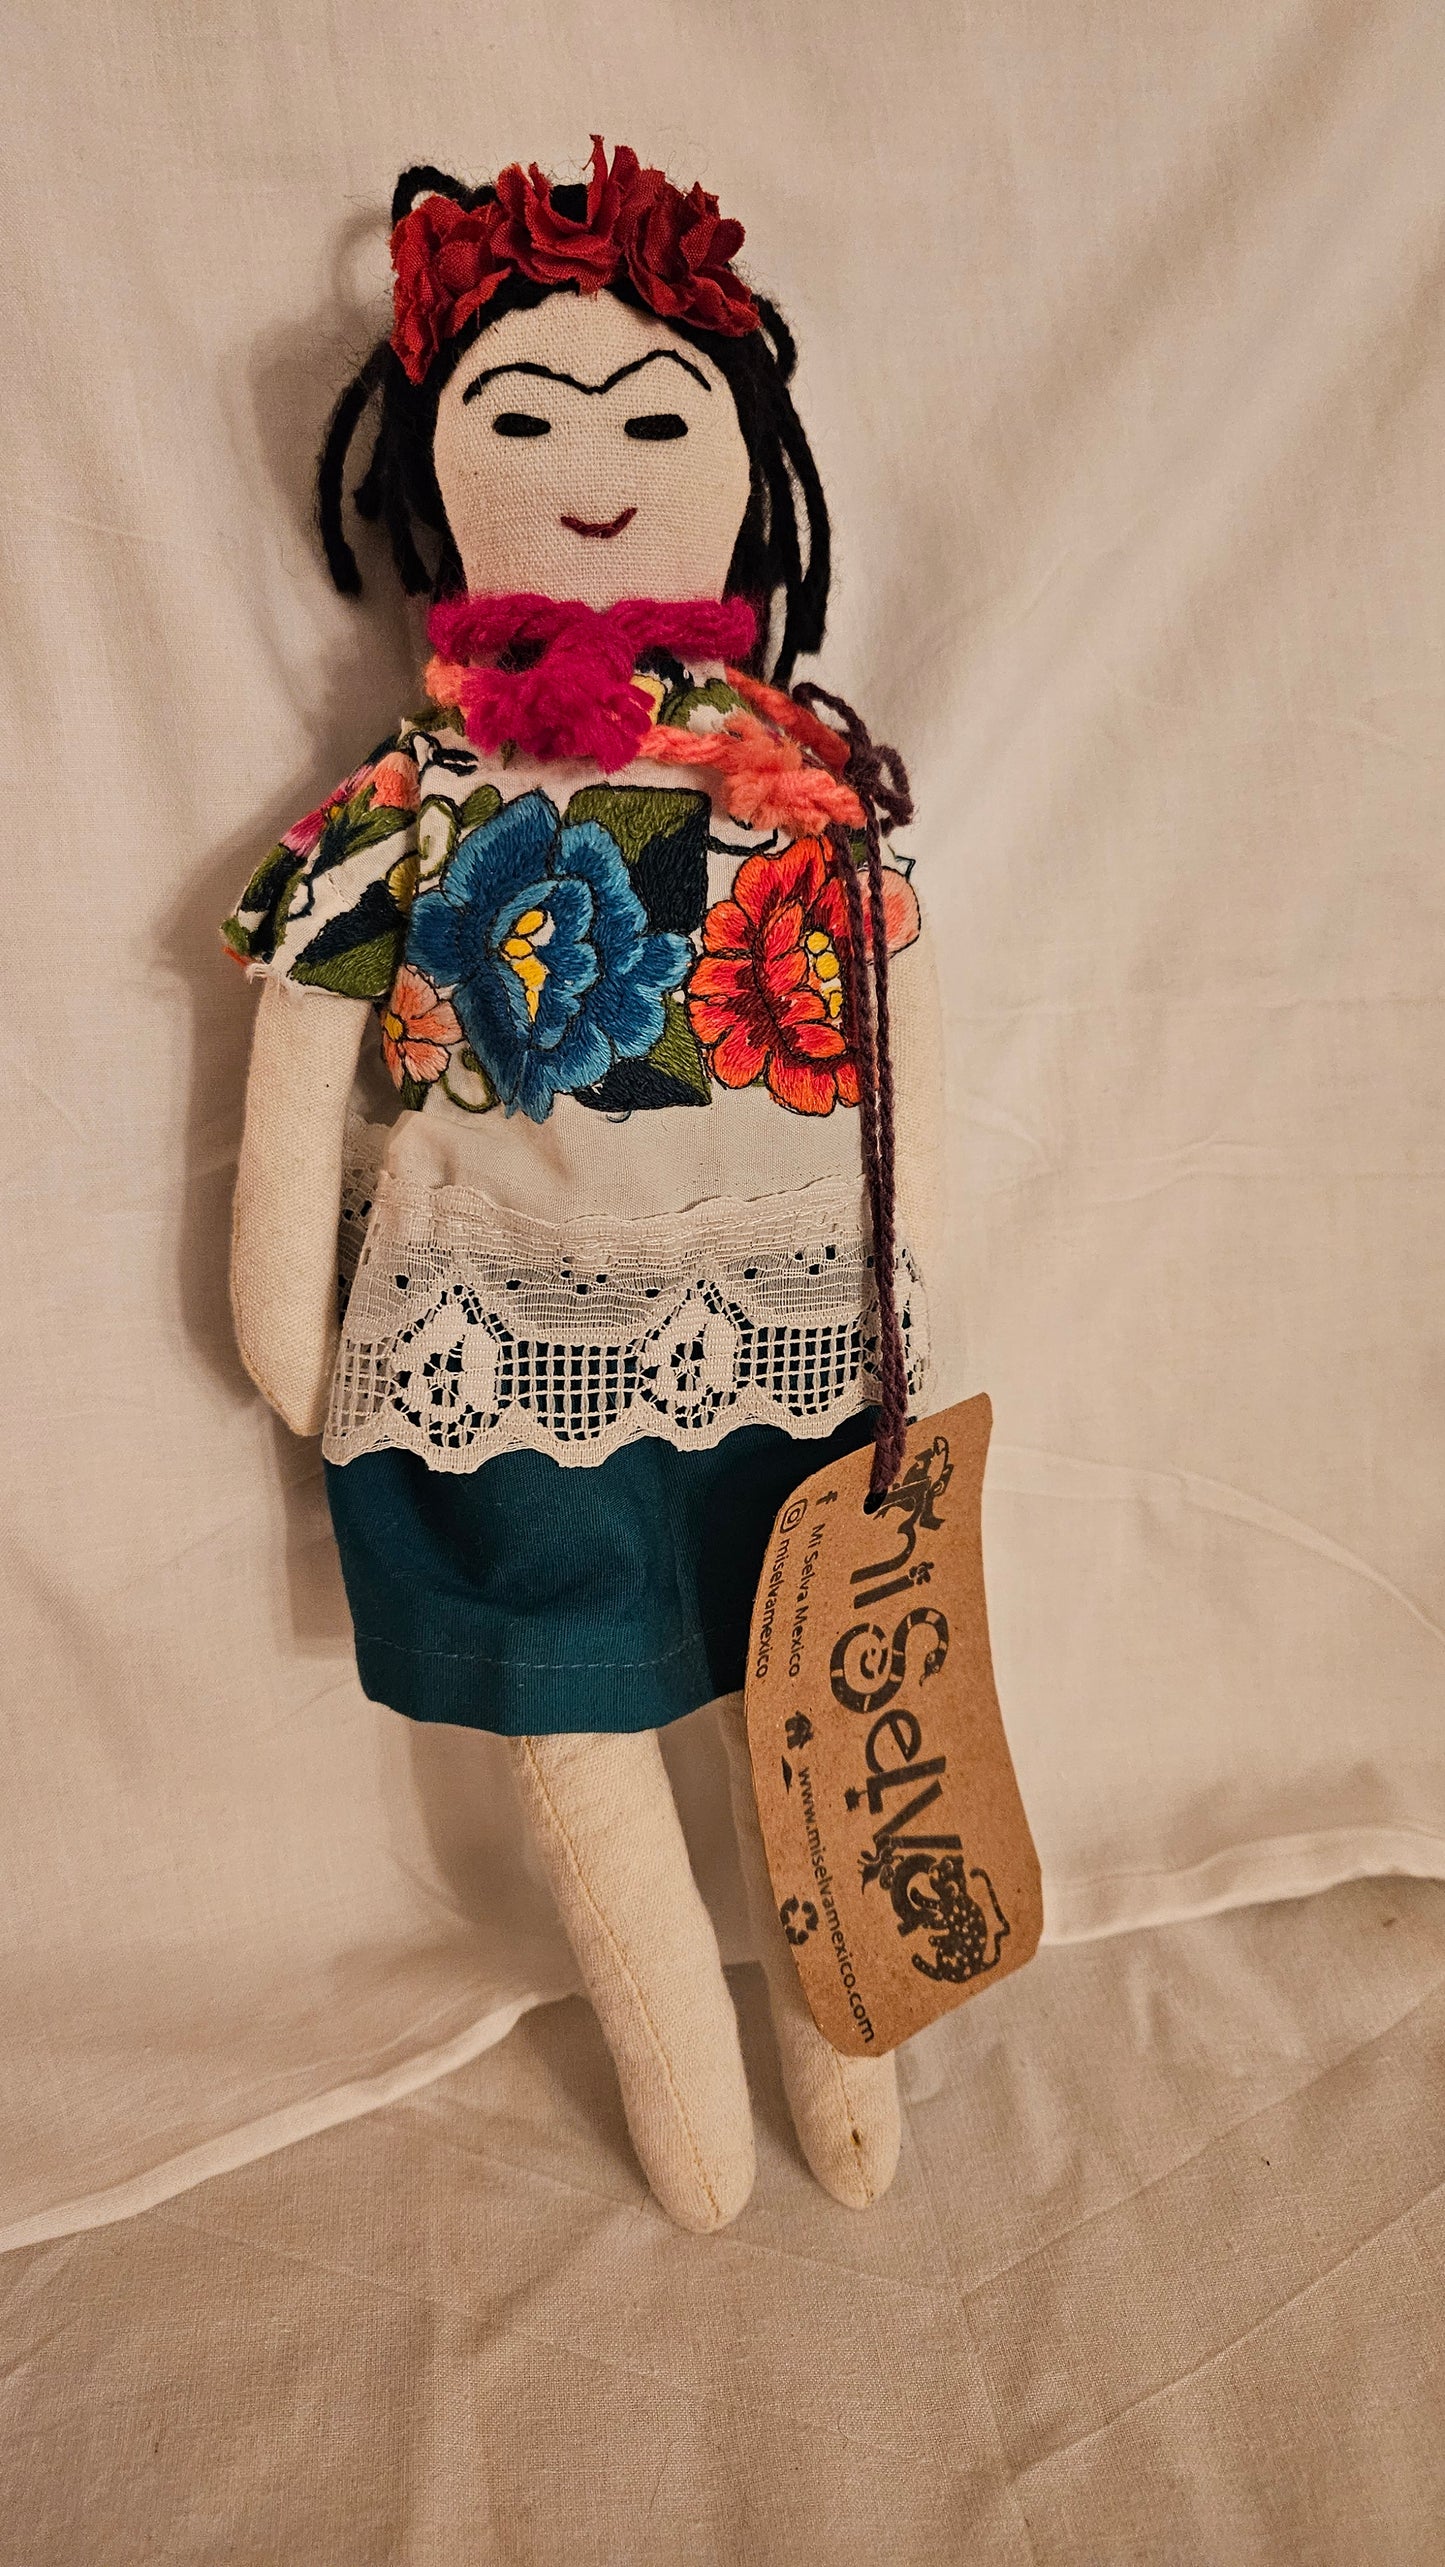 Mexican Textile Doll